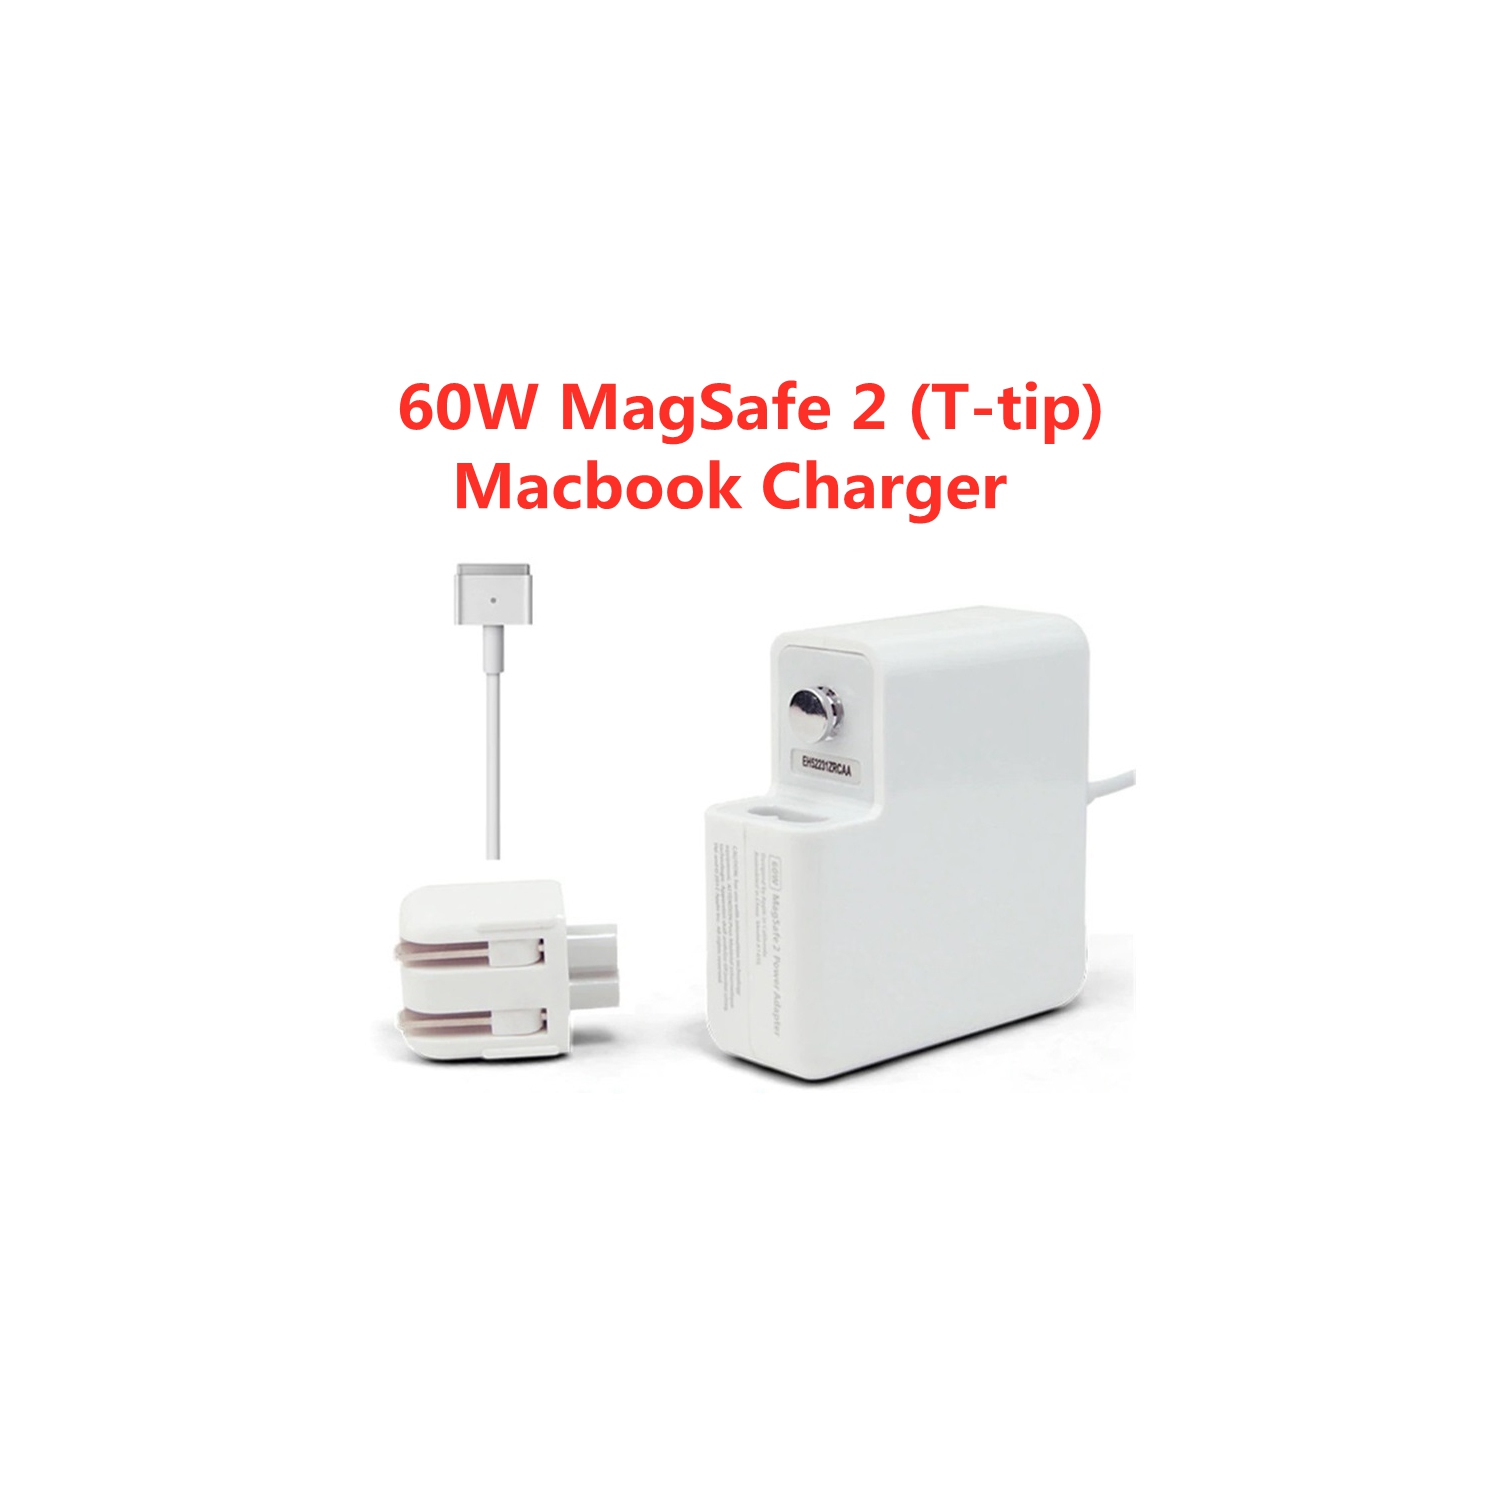 【CSmart】 60W Magsafe 2 Power Adapter Fast Charger T-Tip Magnetic Connector Cable for MacBook Air 11" Pro 13" 2012 to 2015, A1435